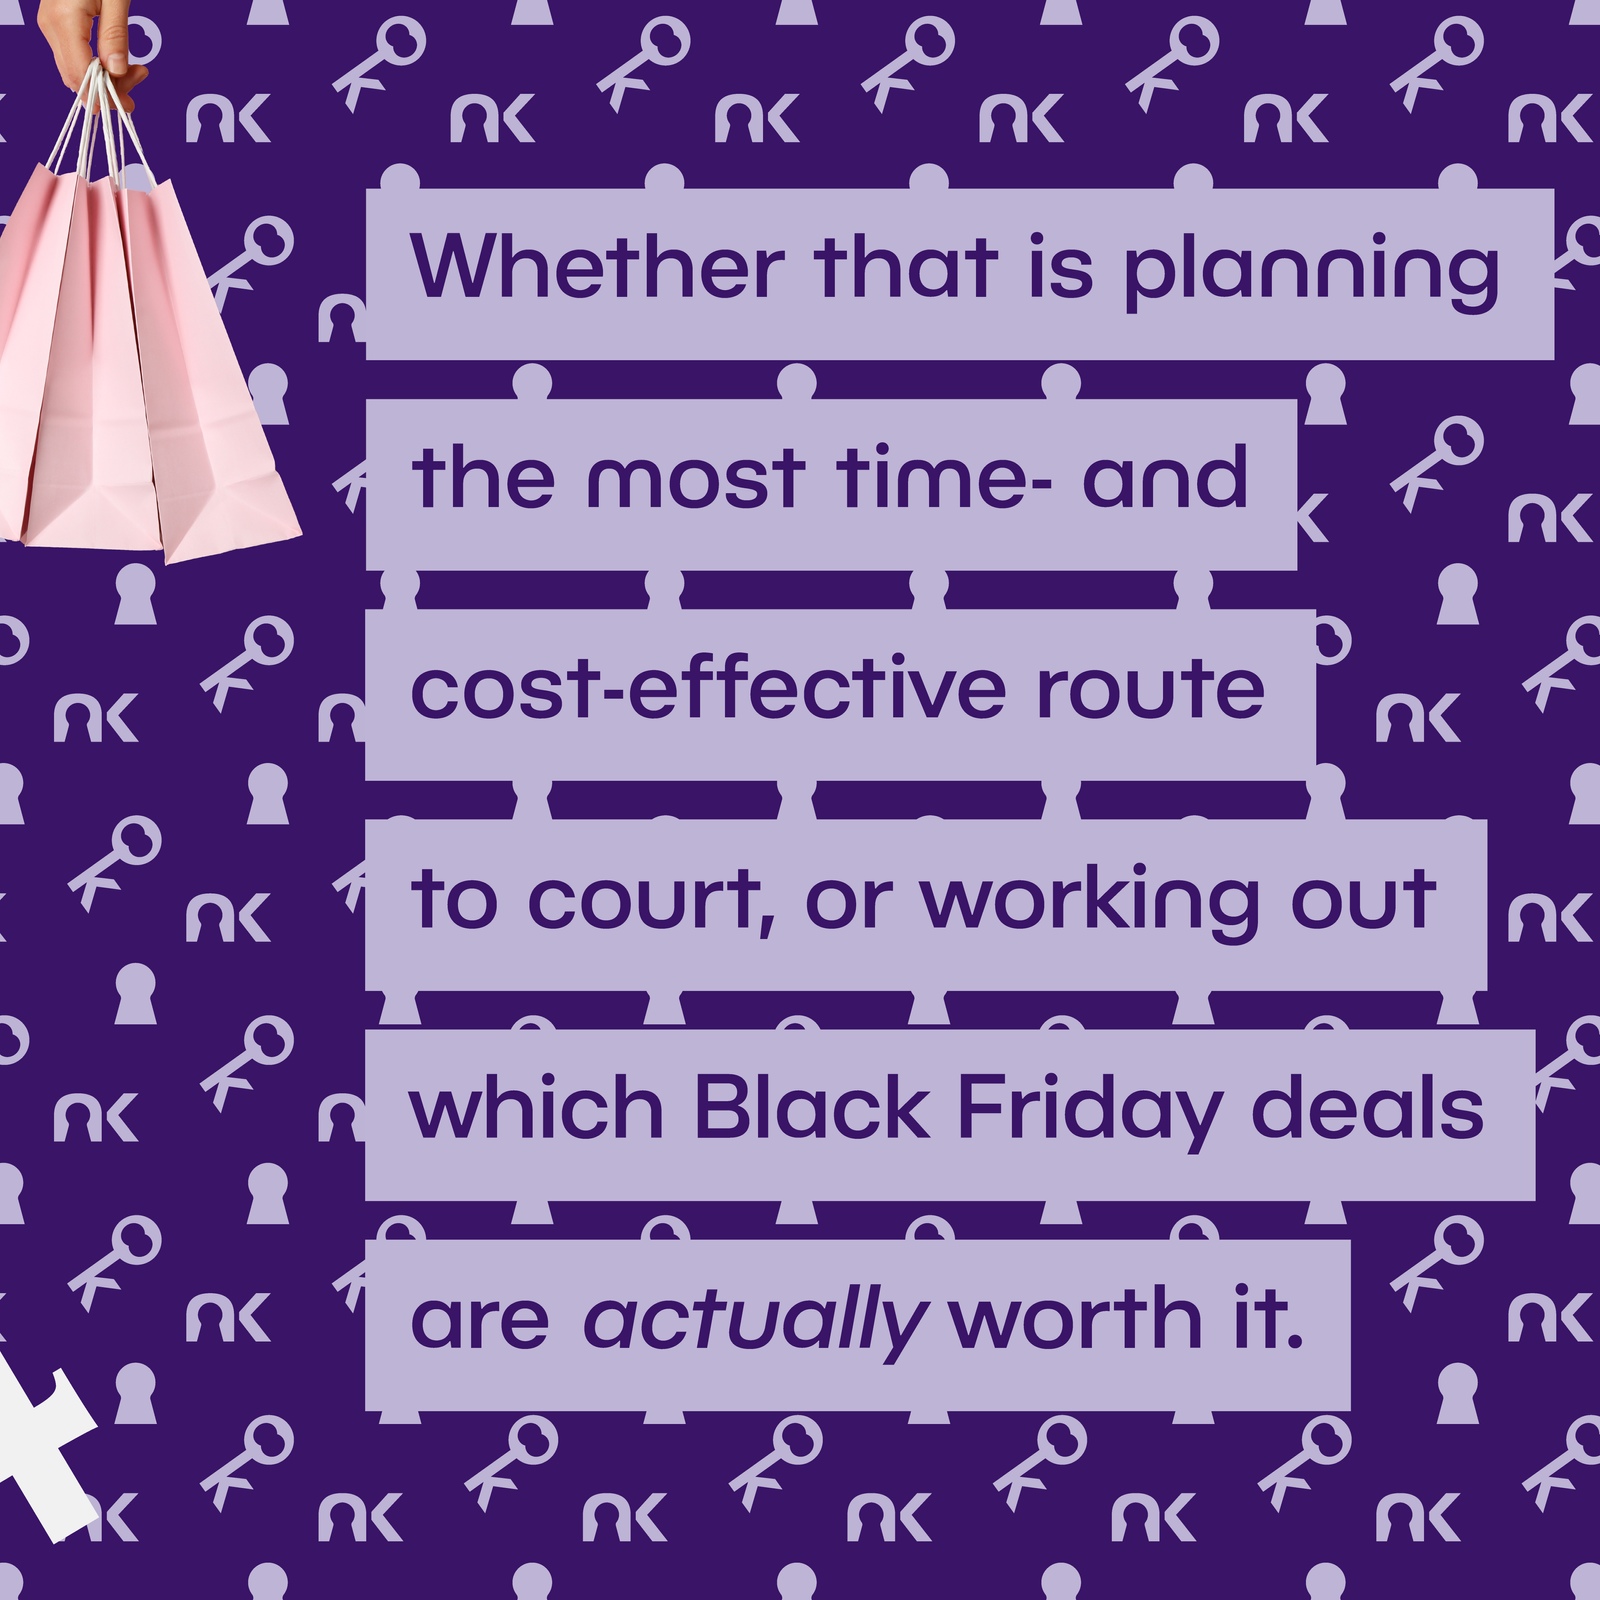 Text says: "Whether that is planning the most time- and cost-effective route to court, or working out which Black Friday deals are actually worth it." next to a white hand carrying pink paper shopping bags.